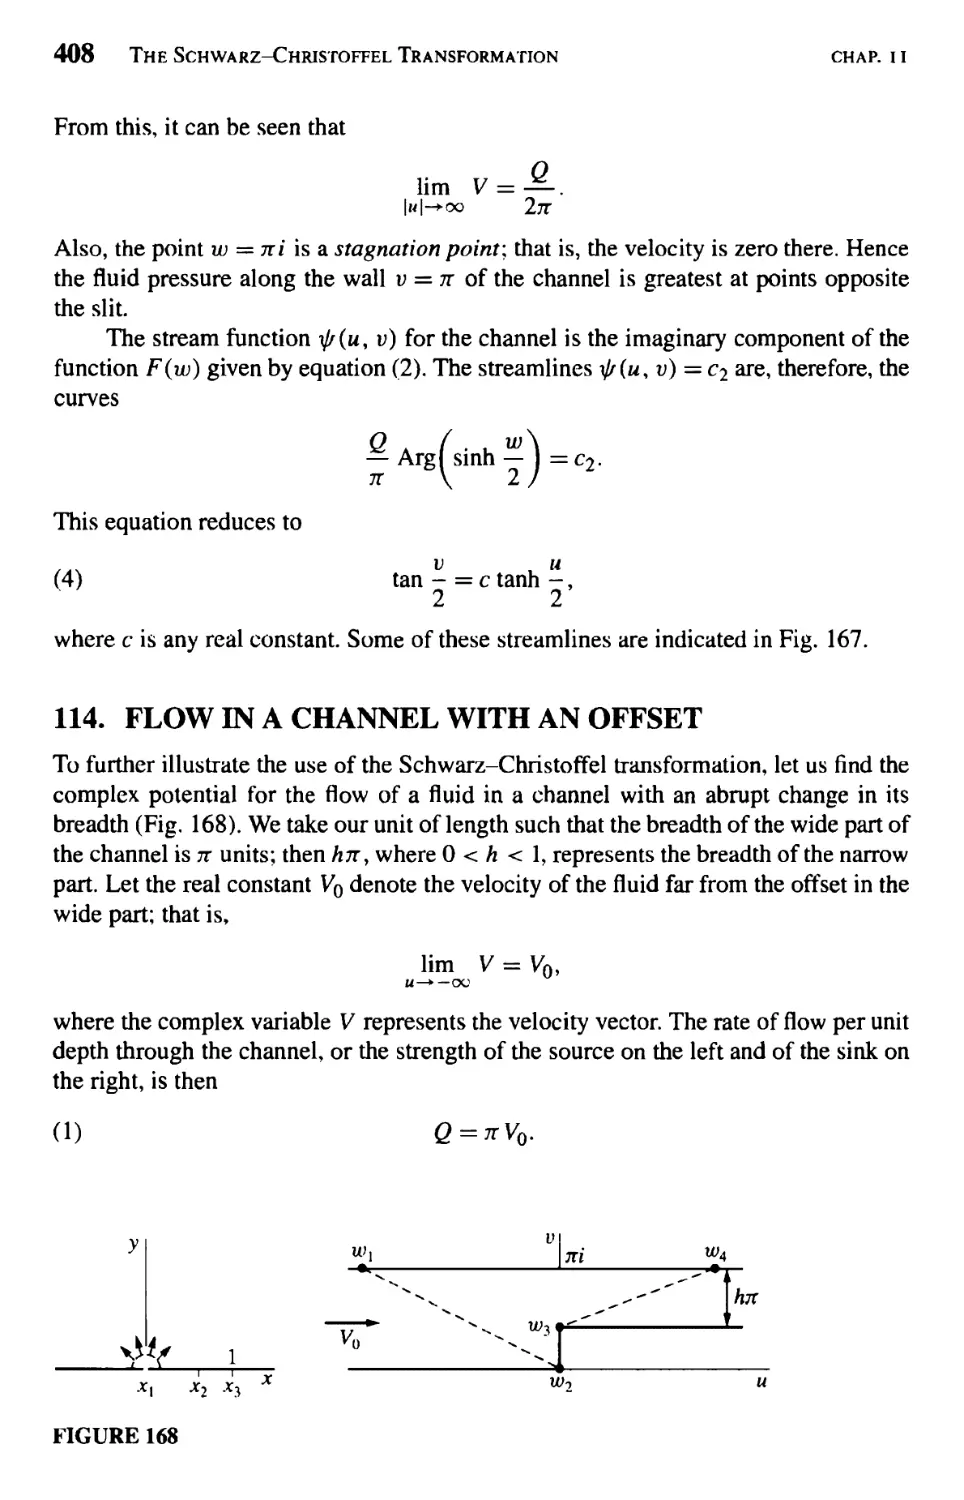 Flow in a Channel with an Offset